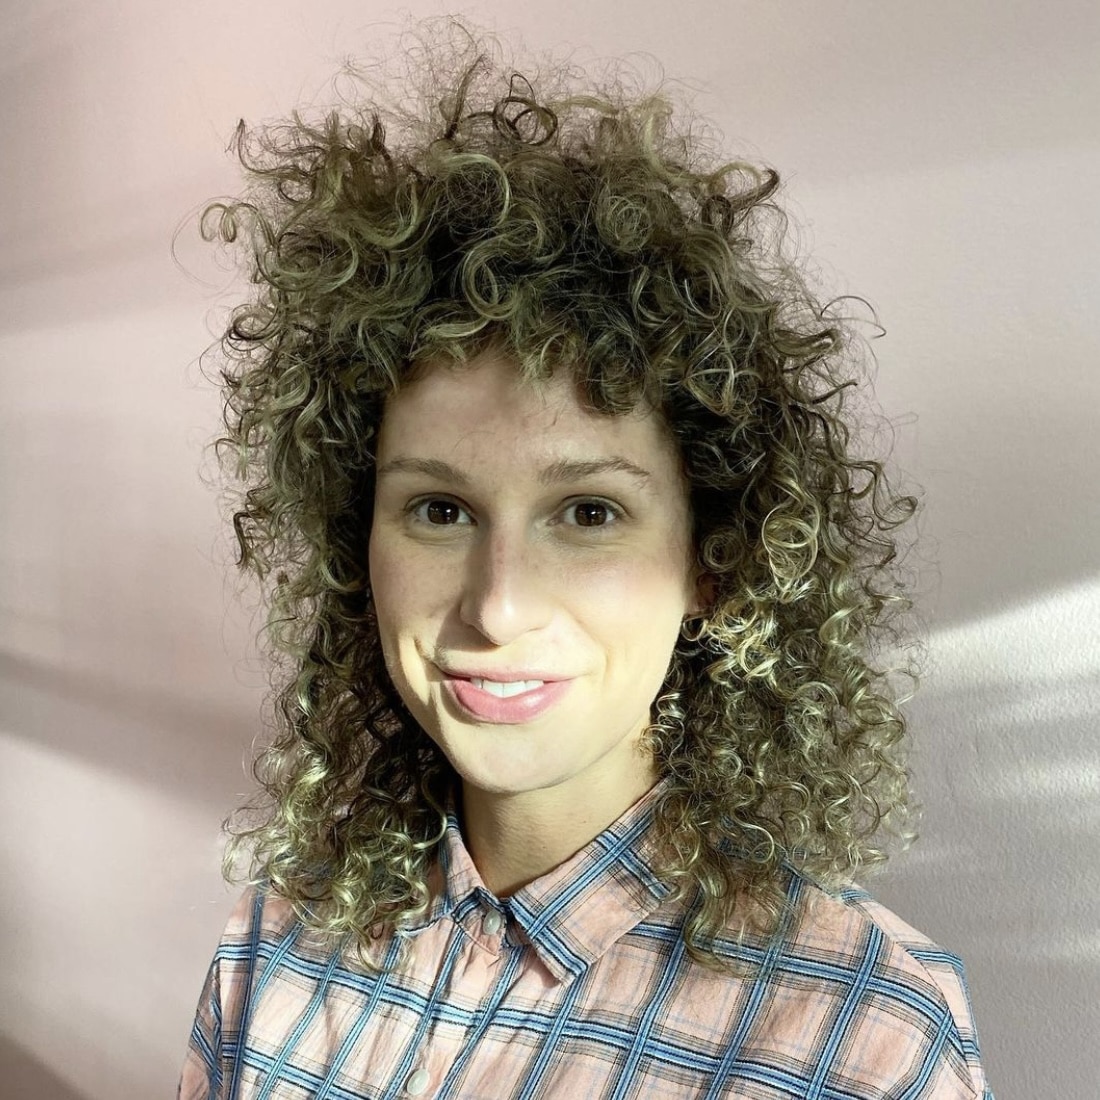 woman with curly hair